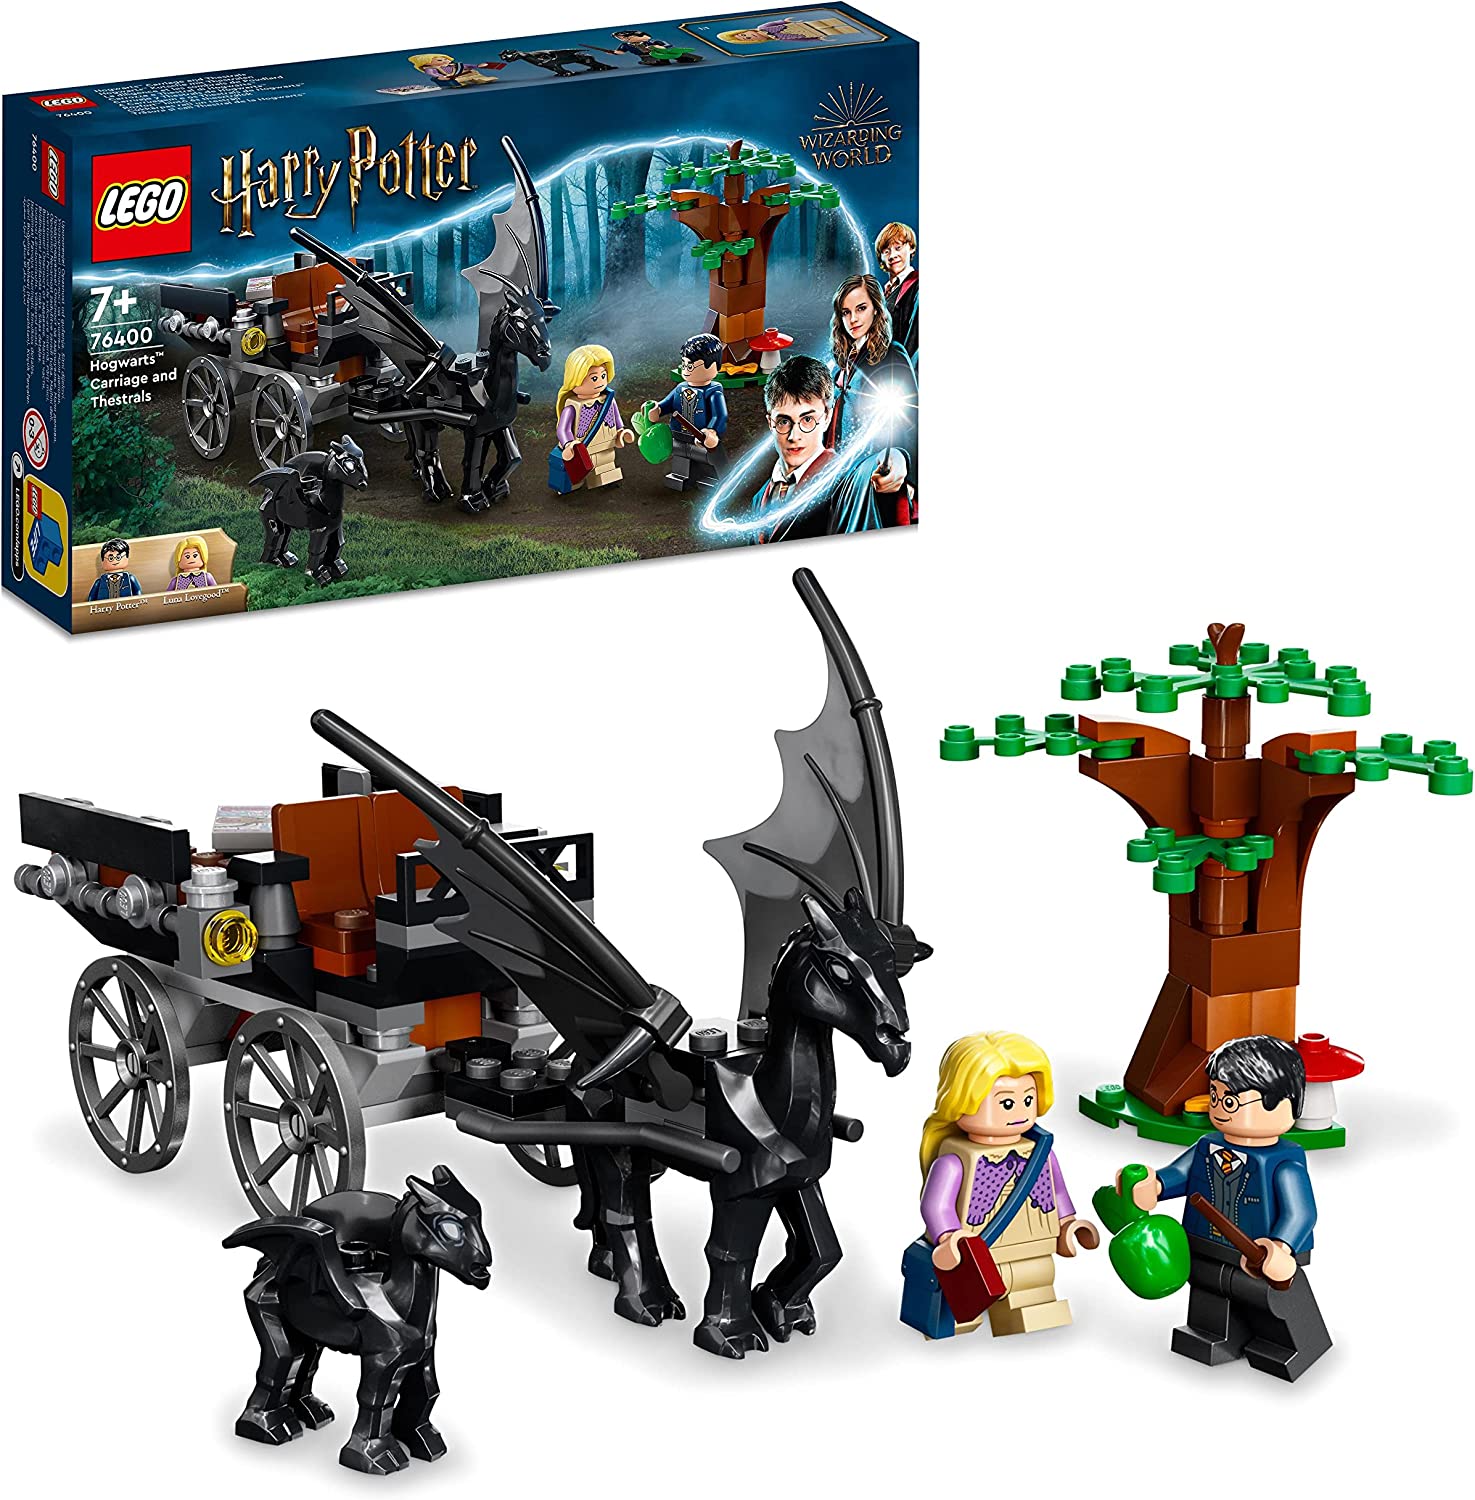 LEGO 76400 Harry Potter Hogwarts Carriage with Thestralen, Toy Set with Mini Figures, Luna Lovegood and Horse Figures, Idea for Gift